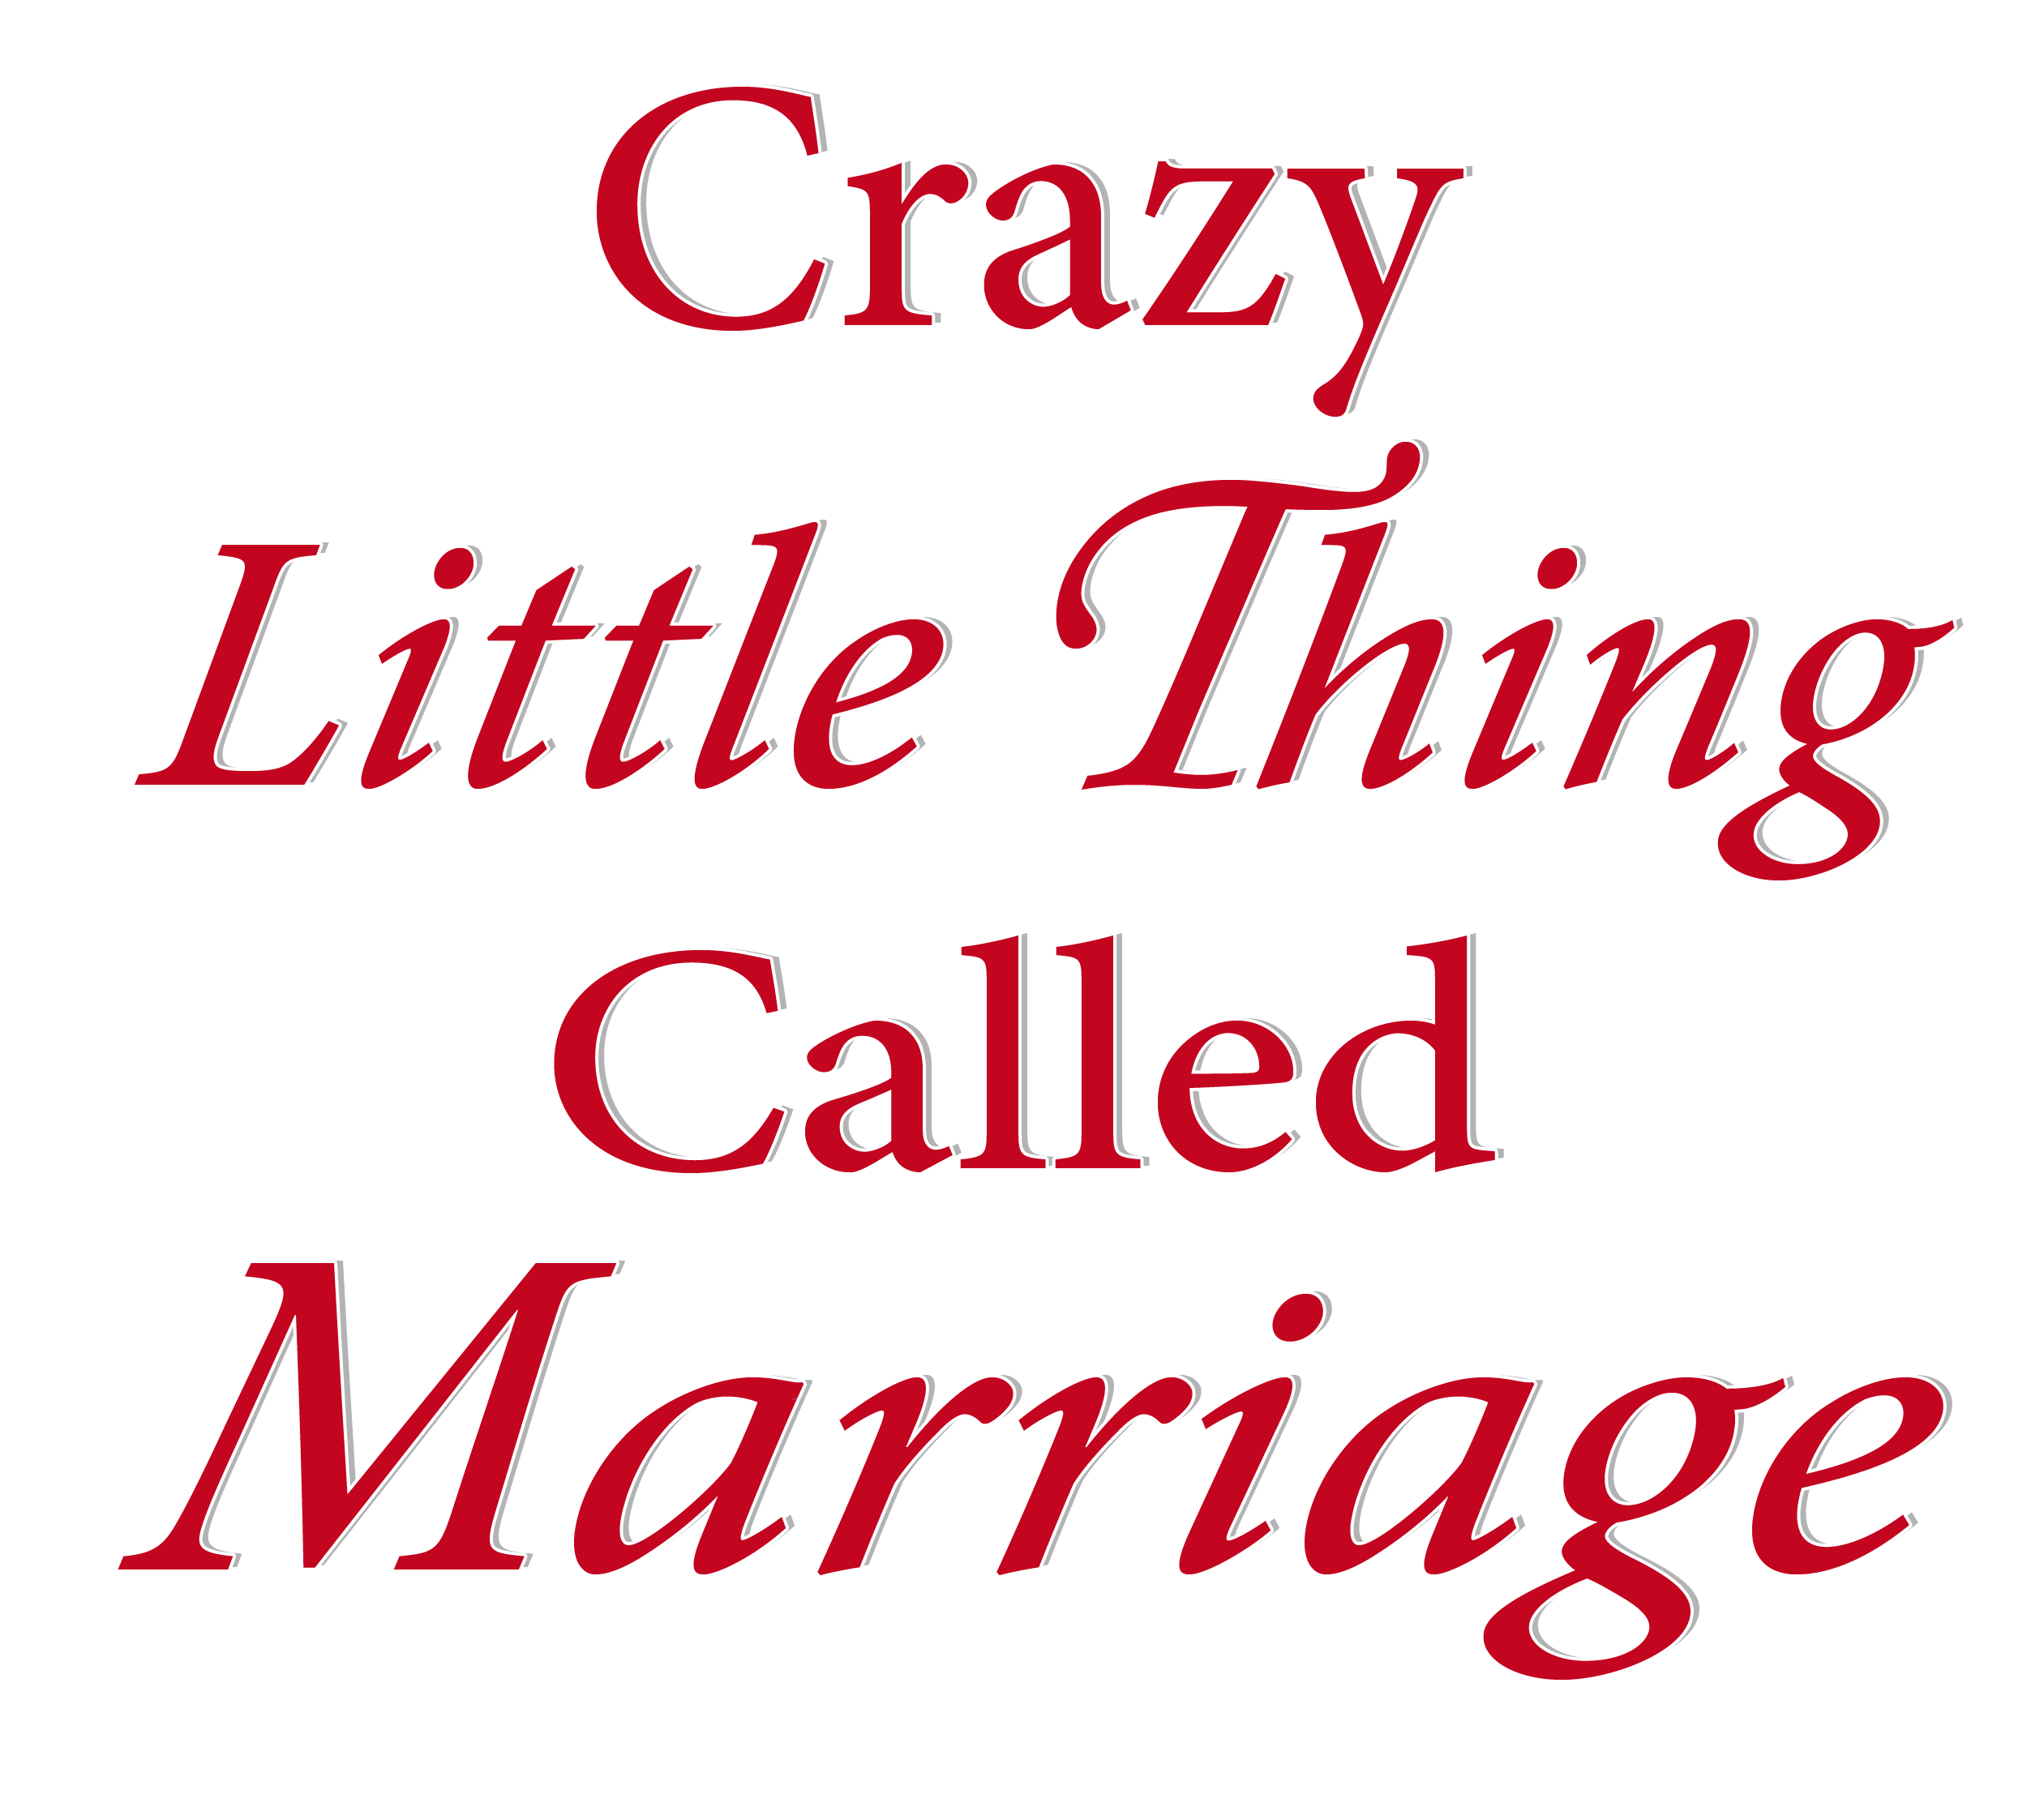 Crazy Little Thing Called Marriage title 3